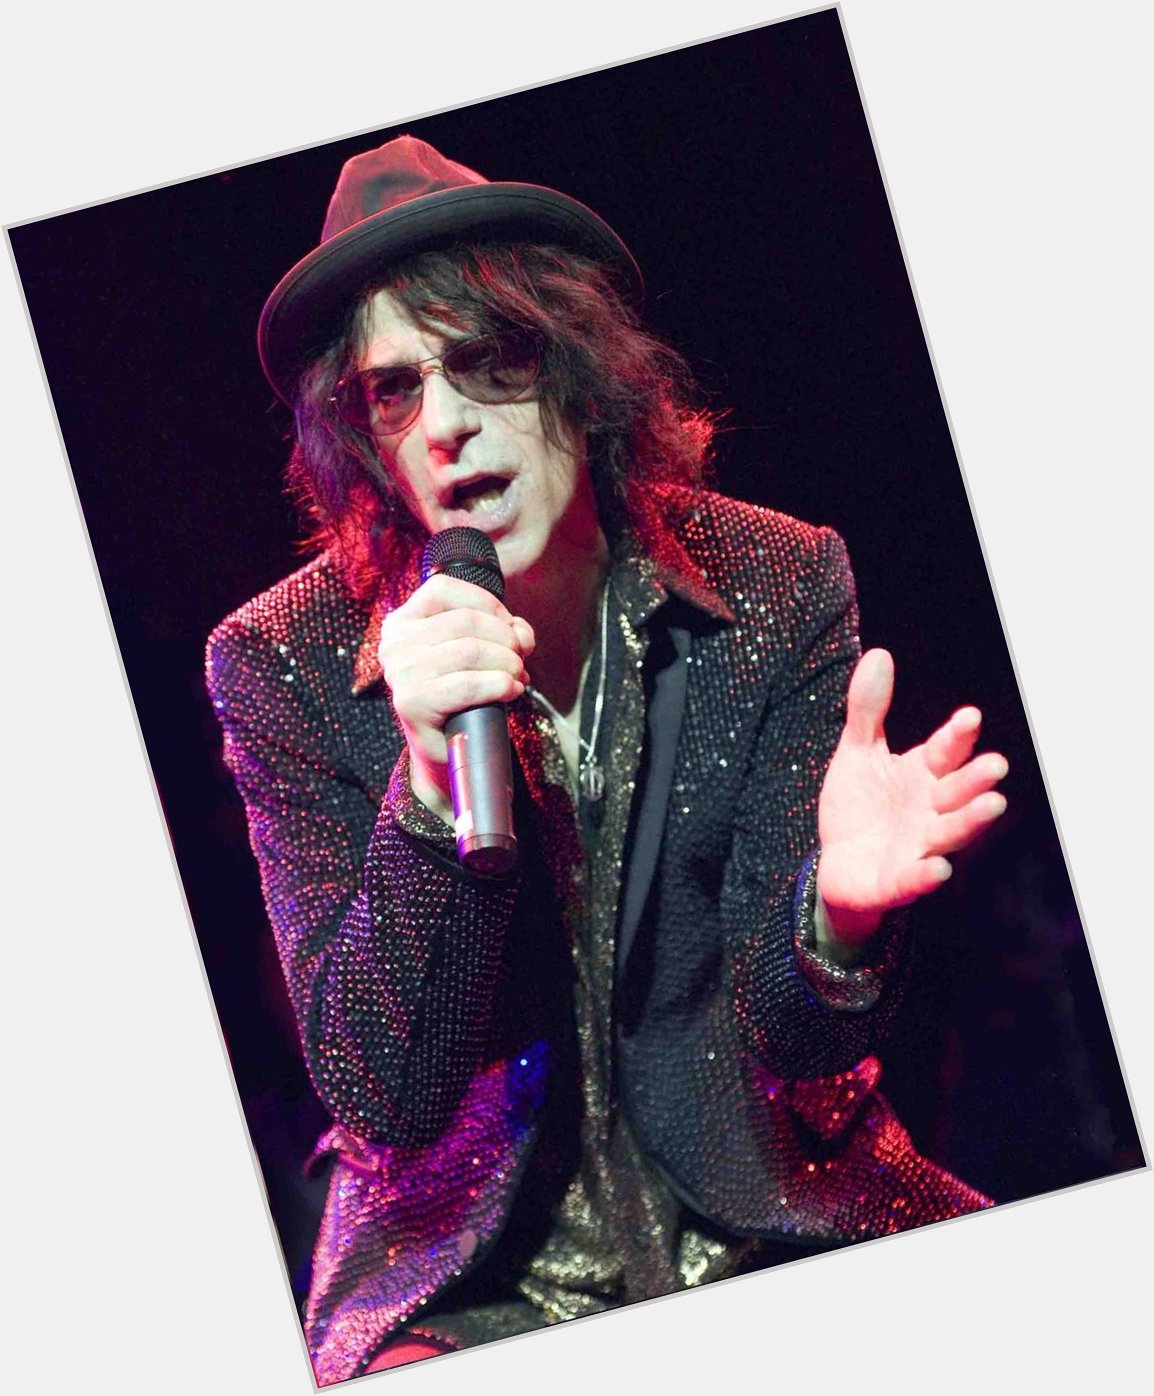 Happy Birthday Peter Wolf of J Geils Band! Remember rockin out Cobo Hall Detroit in early 80s? 